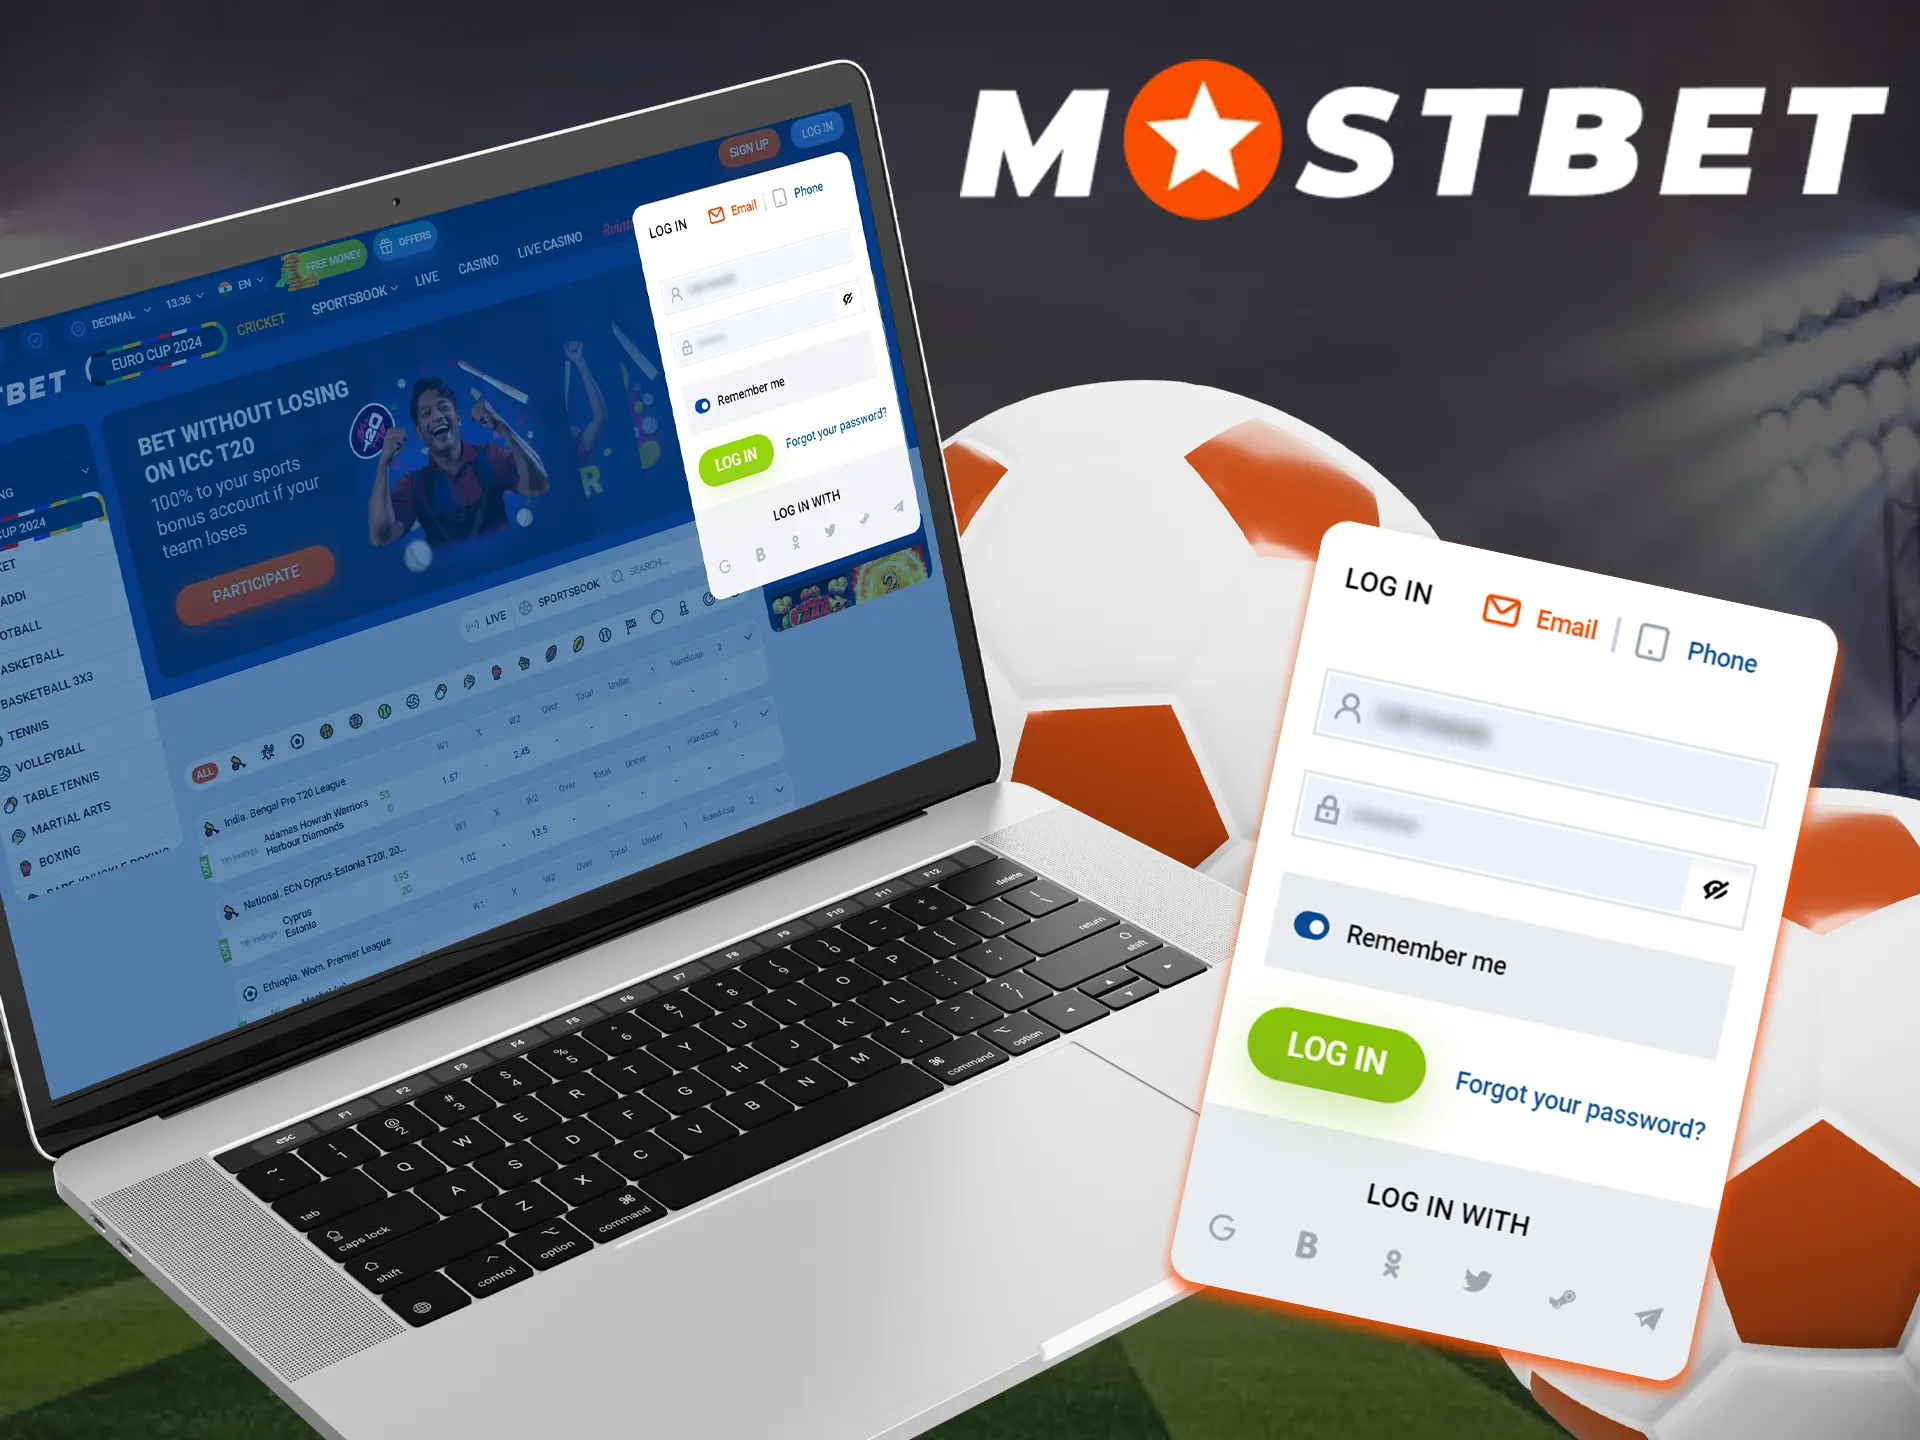 You need to enter your login and password to log in to your Mostbet account.